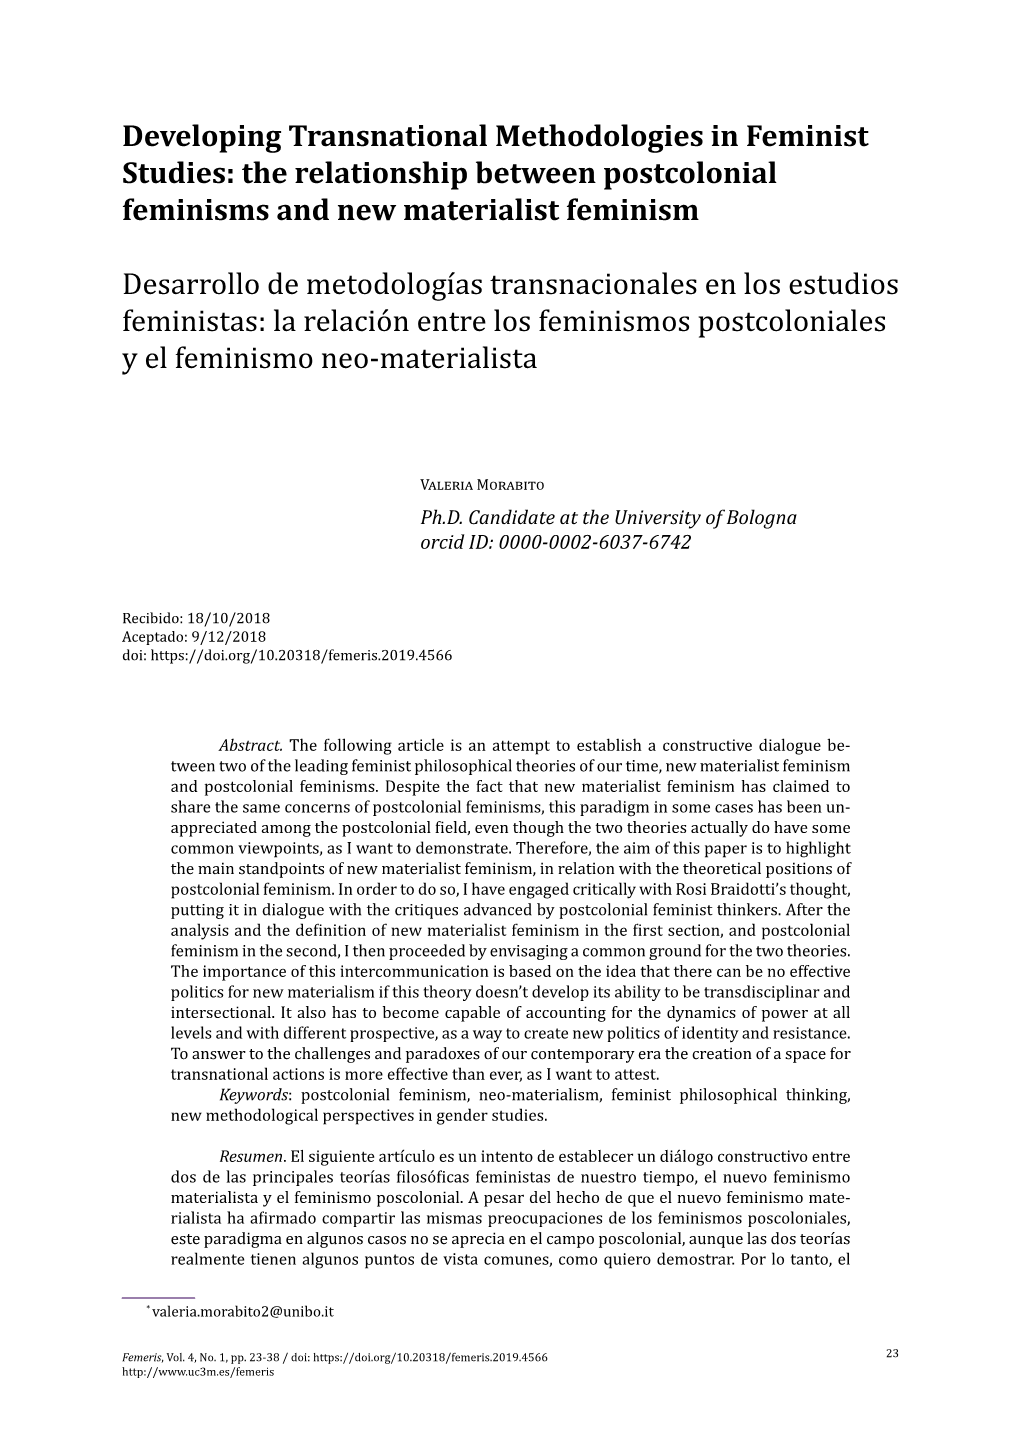 Developing Transnational Methodologies in Feminist Studies: the Relationship Between Postcolonial Feminisms and New Materialist Feminism